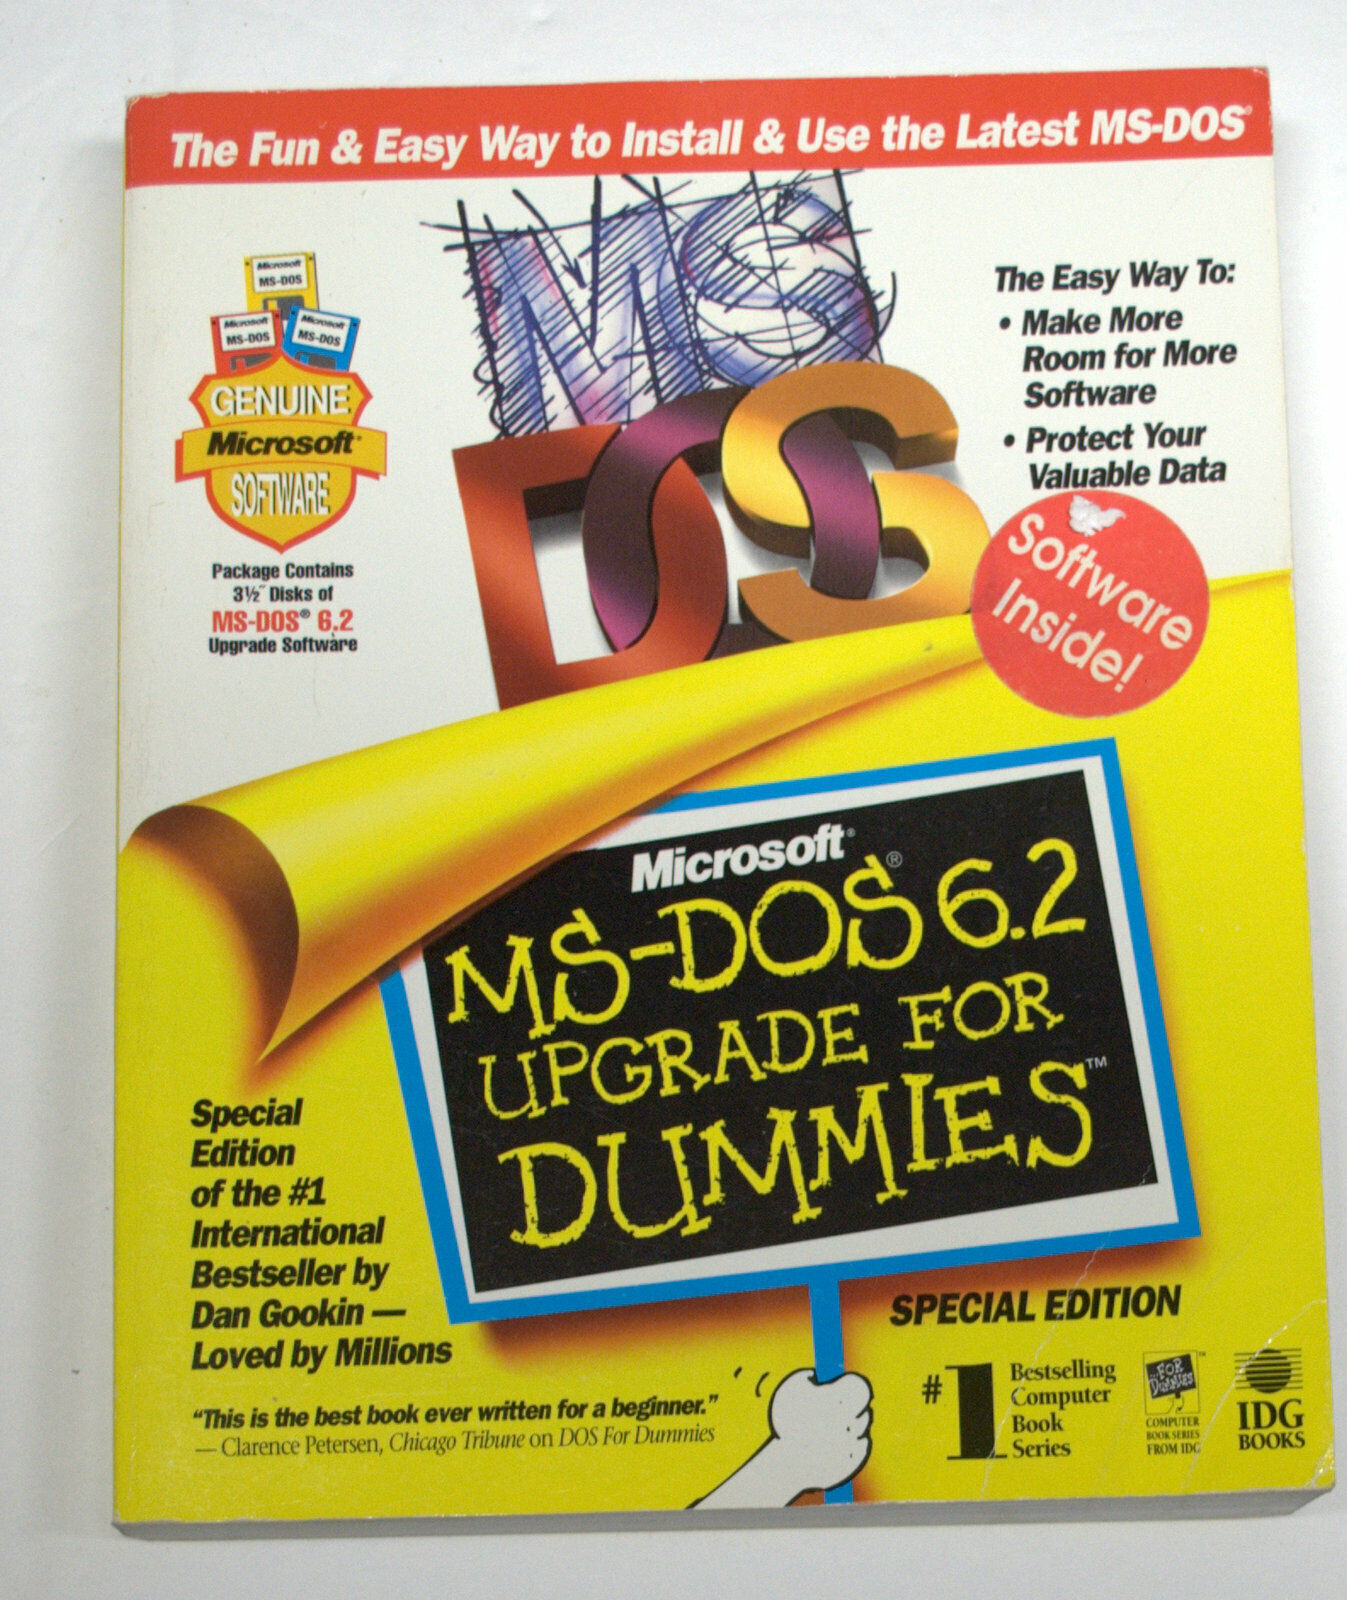 MS-DOS 6.2 Update for Dummies 